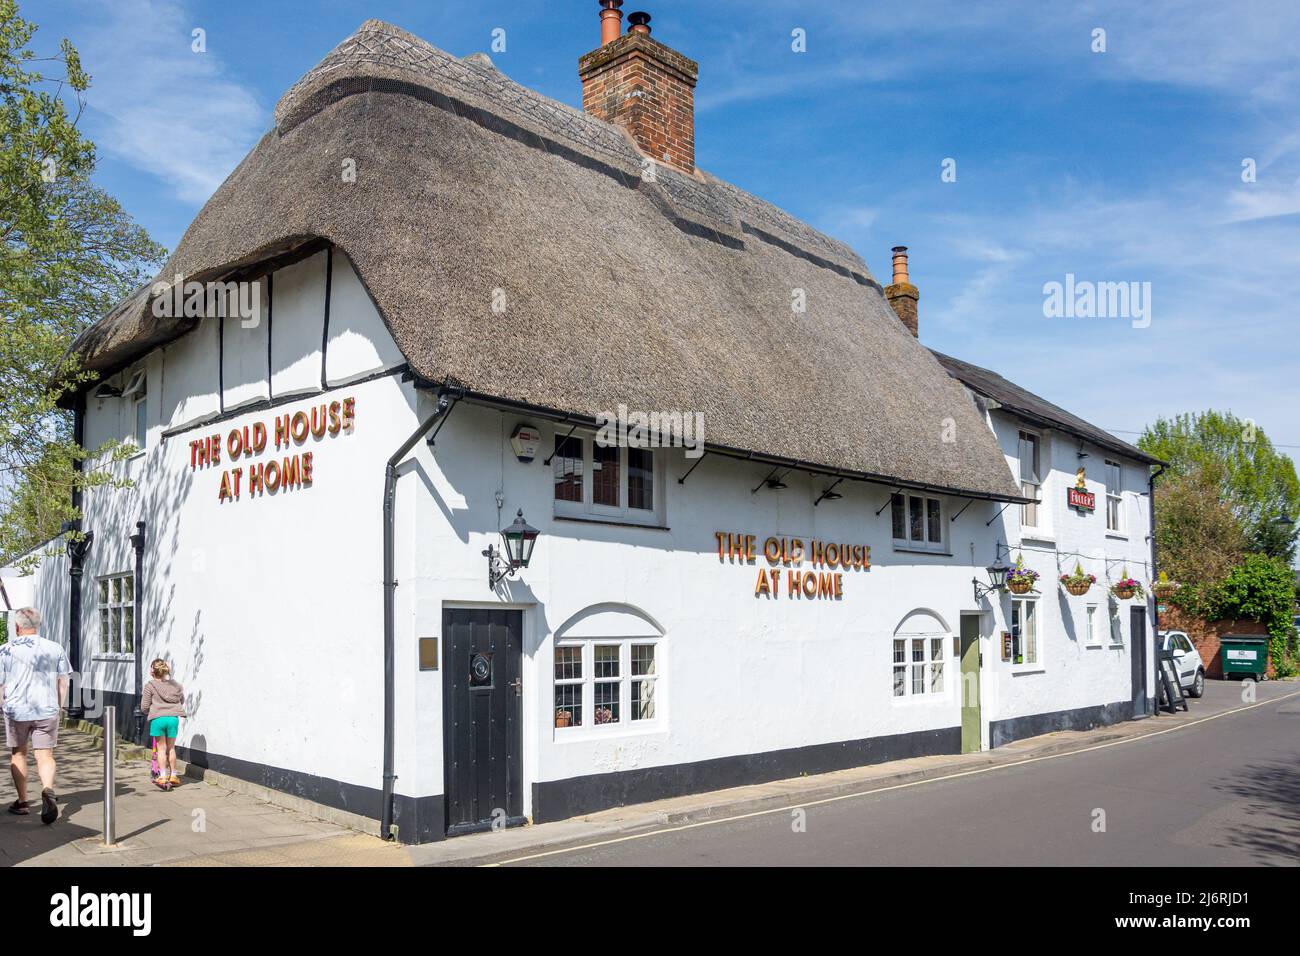 17th century The Old House at Home Pub, Love lane, Romsey, Hampshire, England, United Kingdom Stock Photo